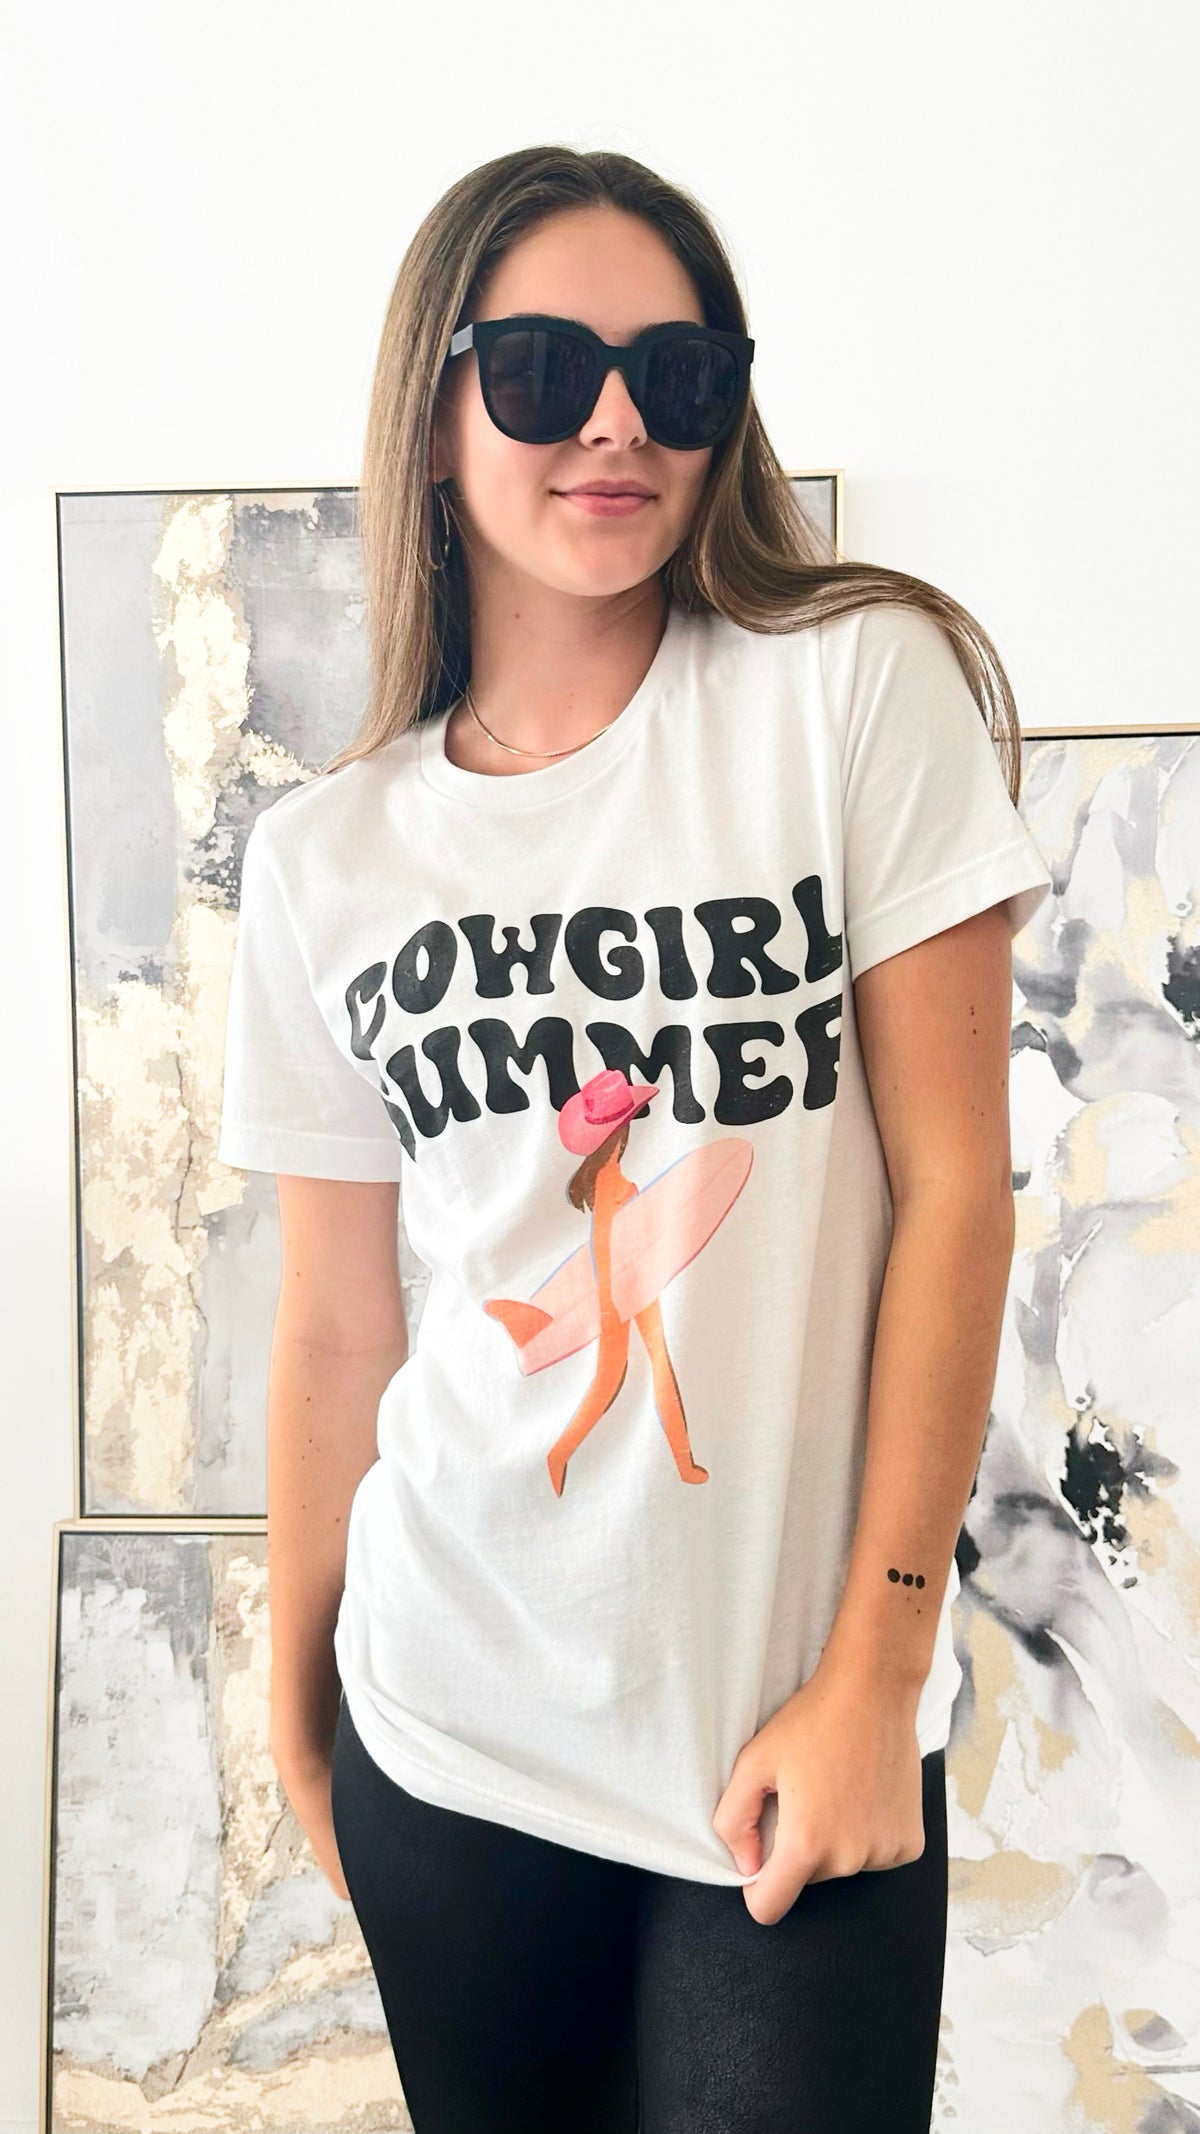 Cowgirl Summer Graphic Tee Shirt-120 Graphic-WKNDER-Coastal Bloom Boutique, find the trendiest versions of the popular styles and looks Located in Indialantic, FL